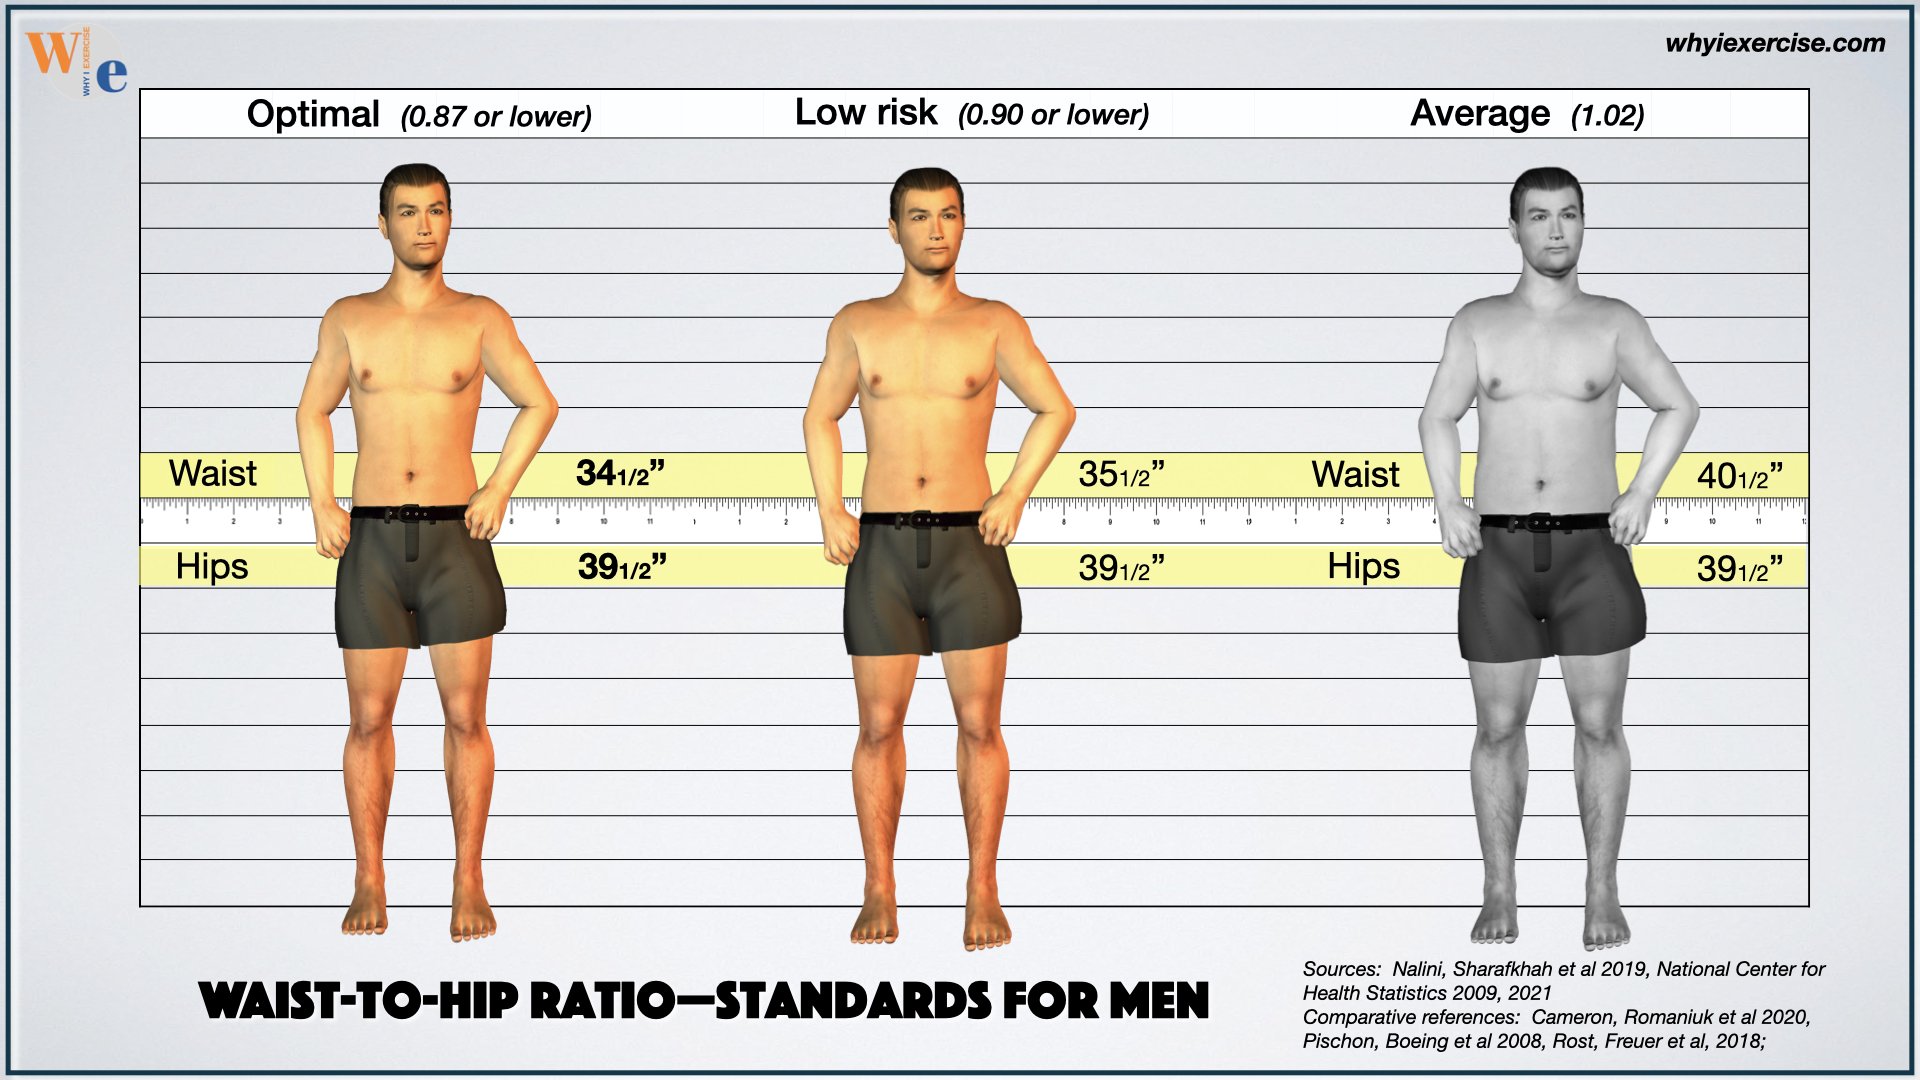 Waist-to-hip ratio: Reliable research shows if you need to lose weight